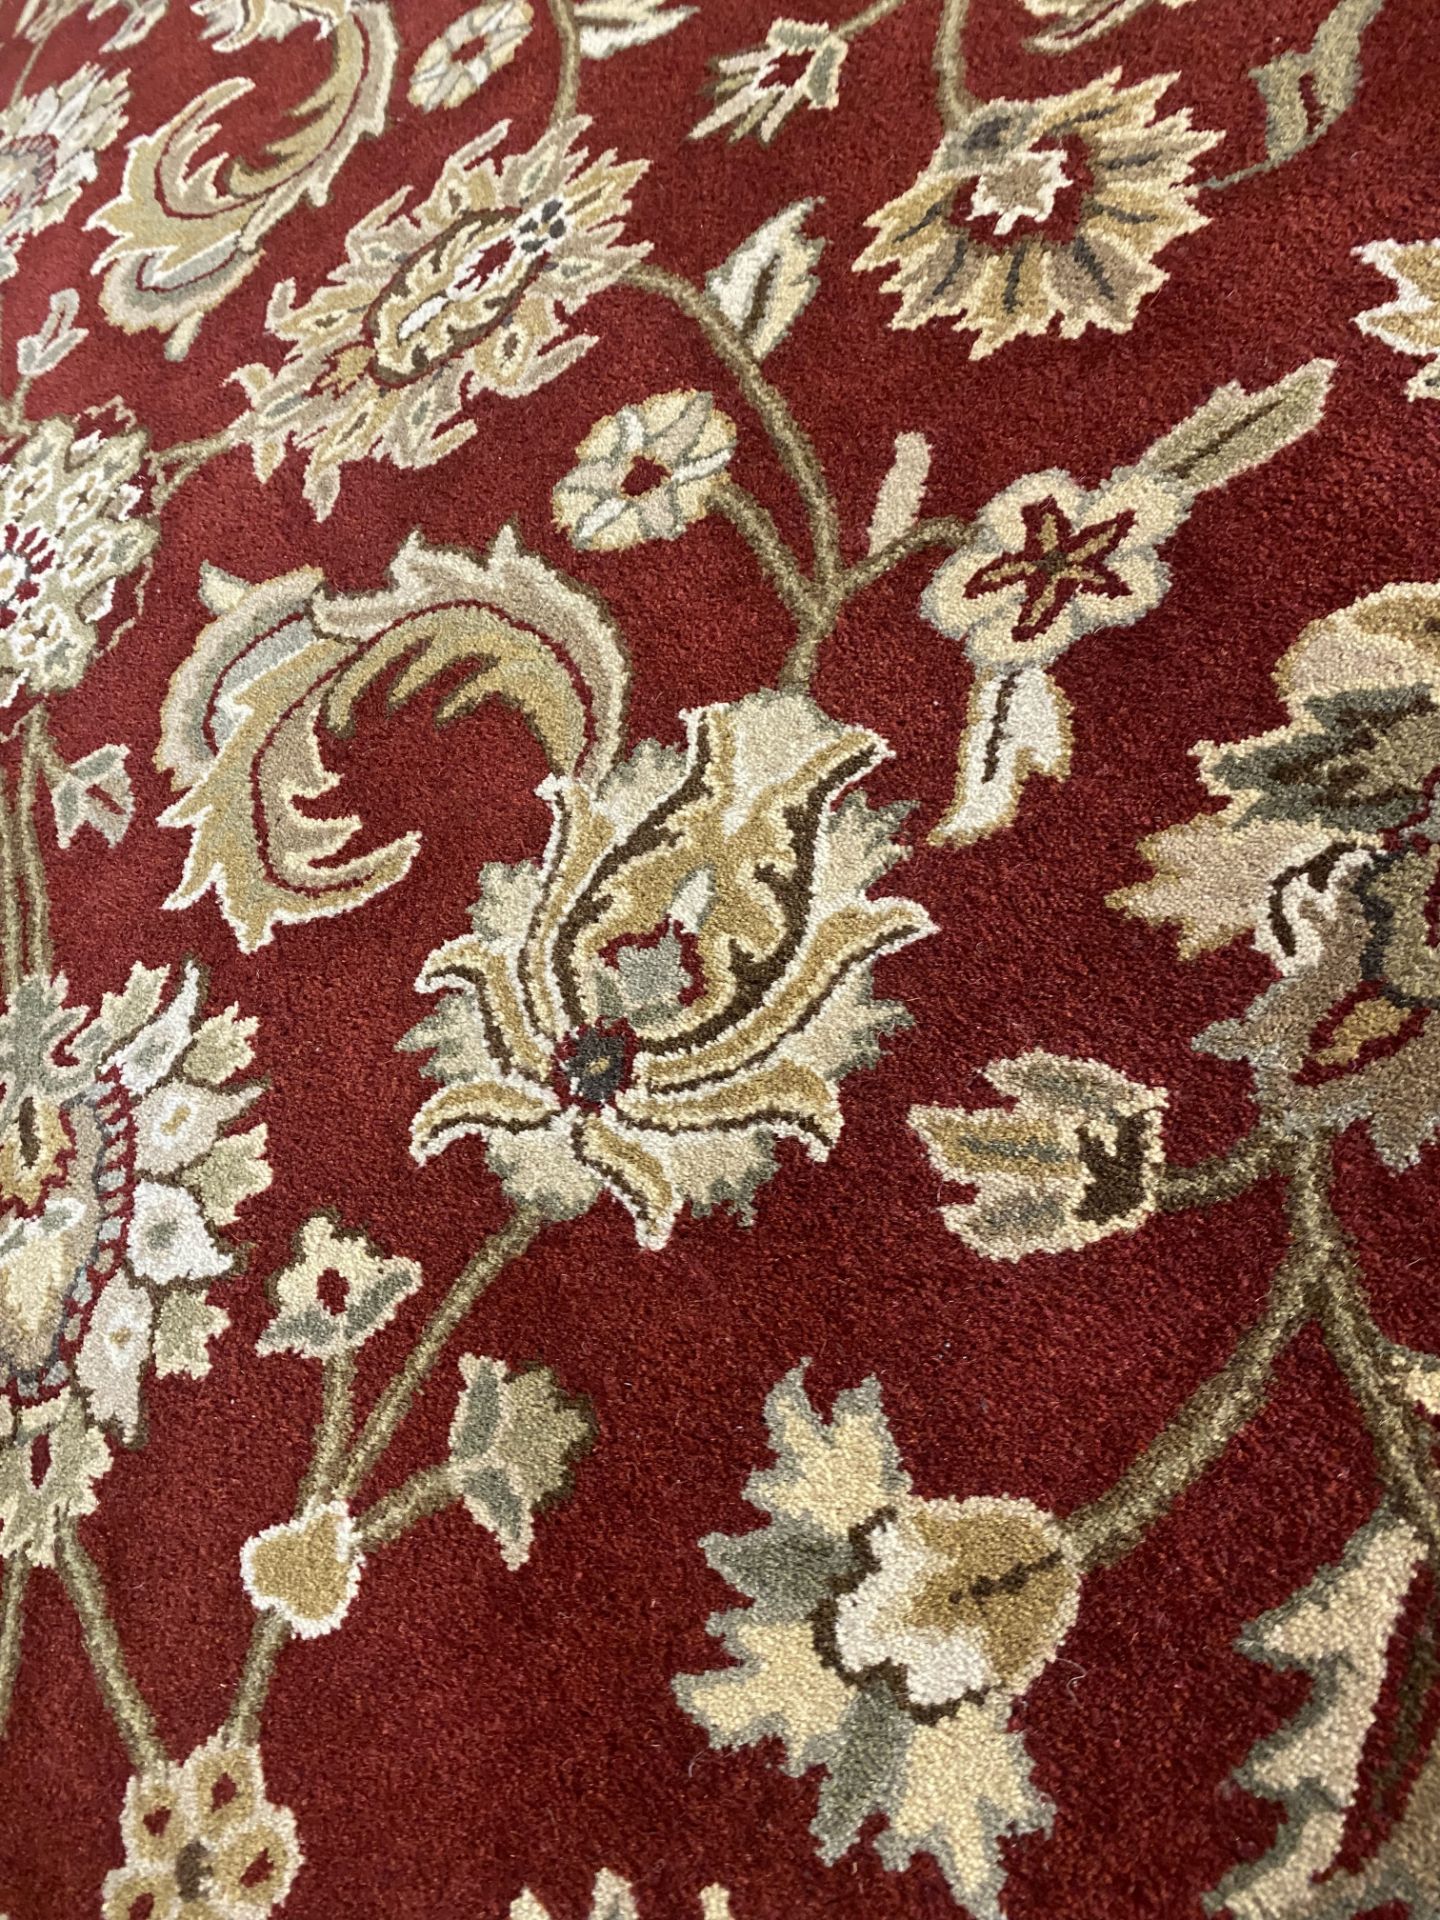 8' ROUND WOOL HAND MADE IN INDIA, MSRP $1,998, INVENTORY CODE LE MANS IAC82128 RD/IV - Image 3 of 6